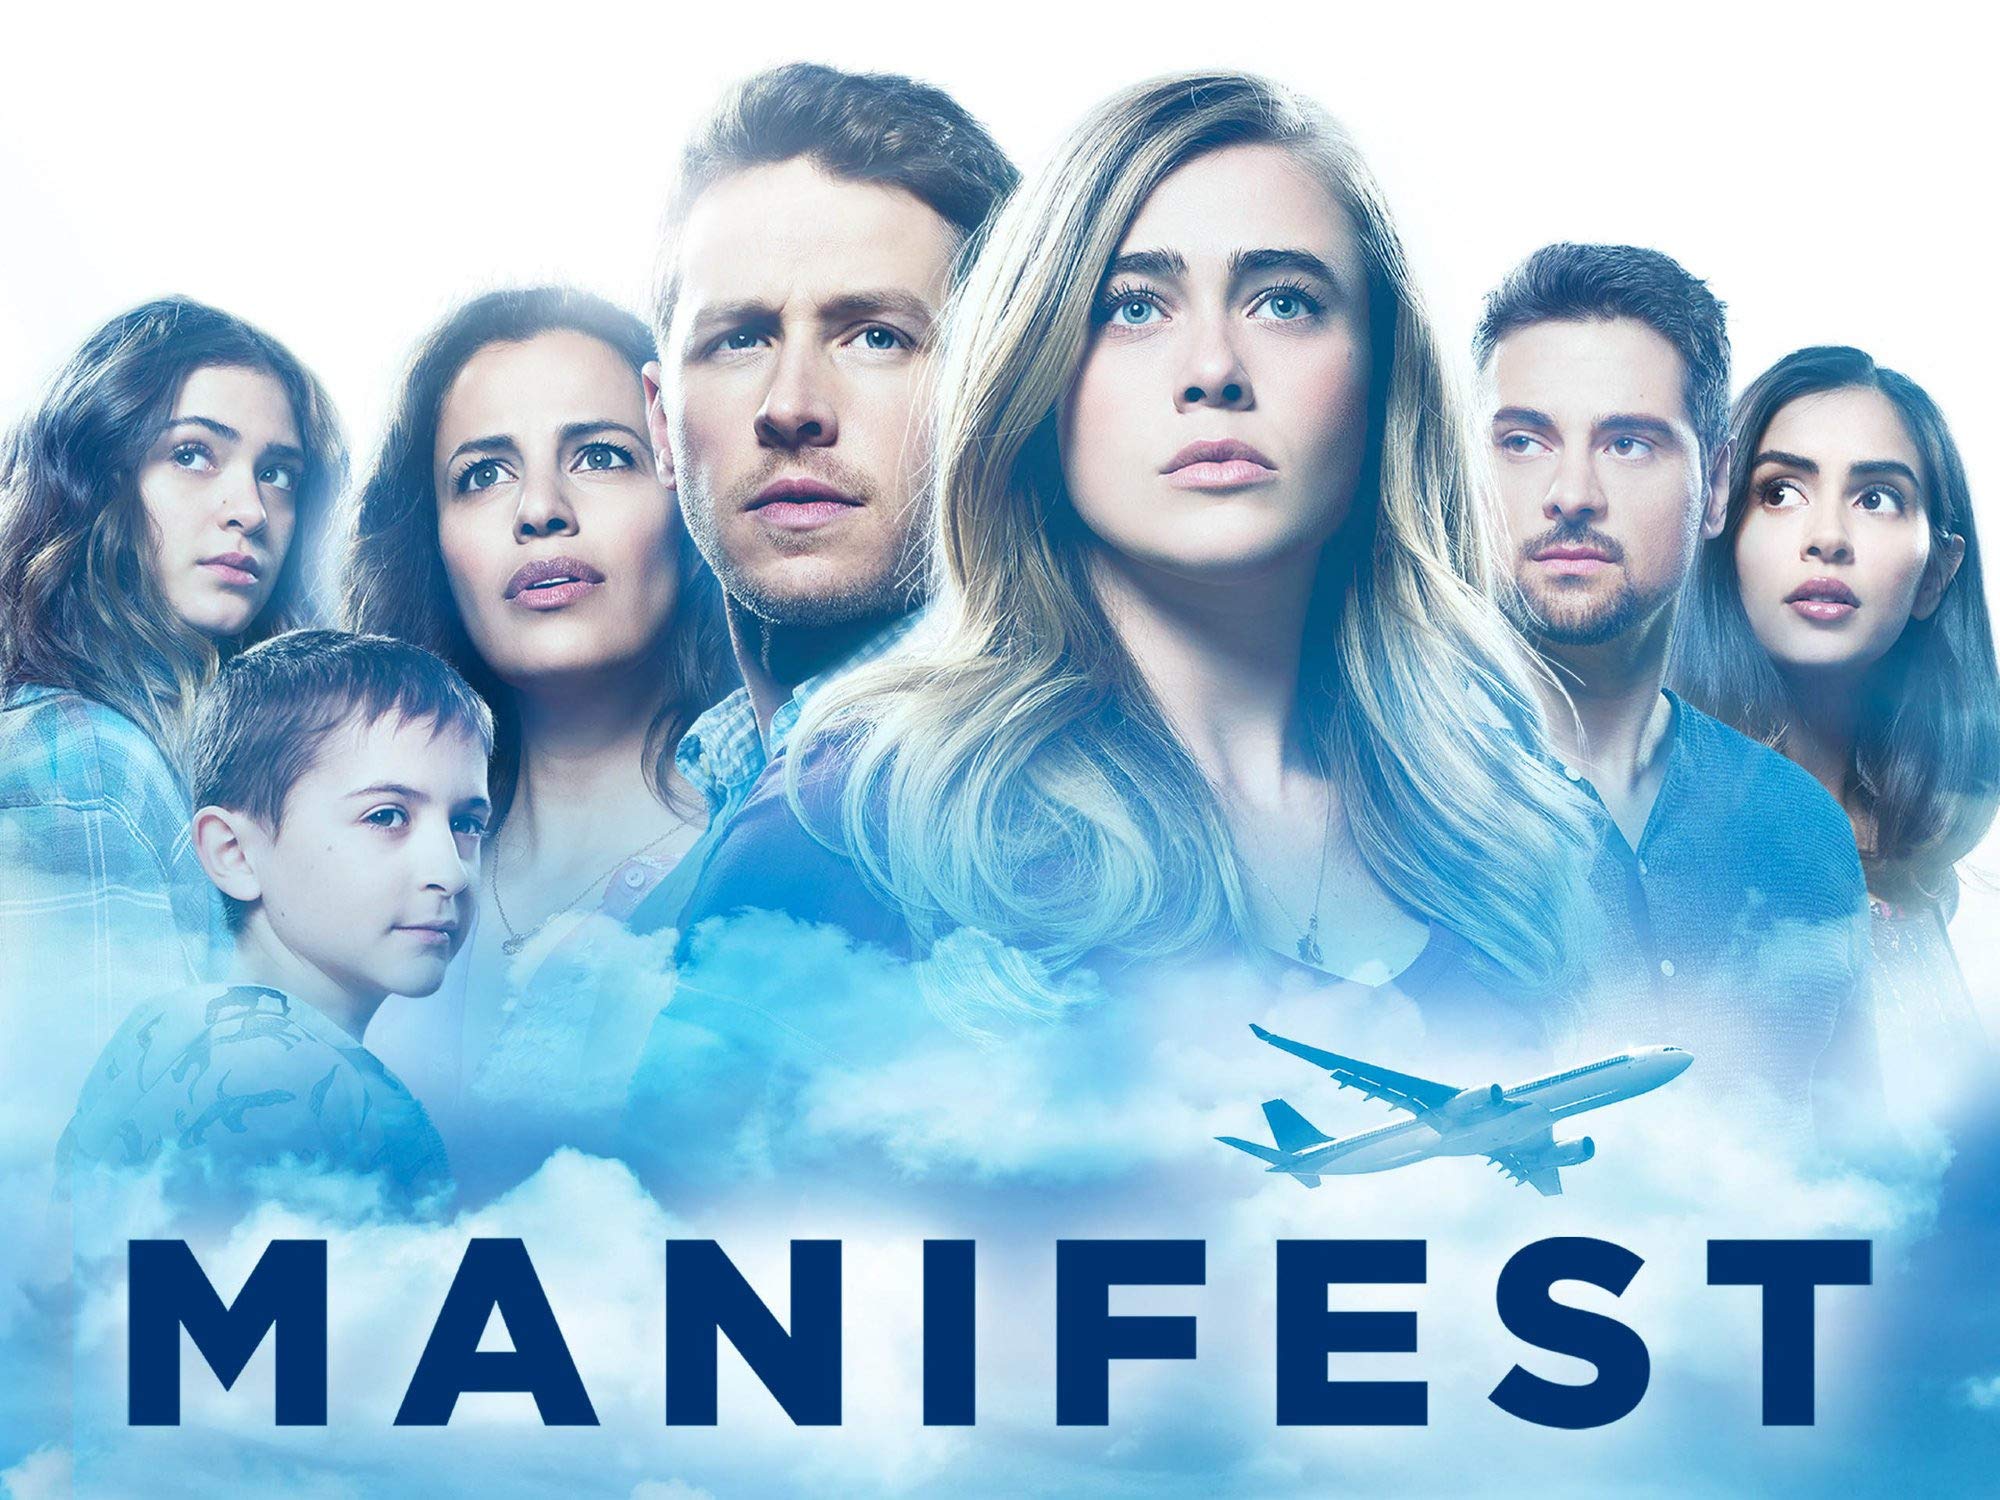 When Does Season 3 Of Manifest Come On Netflix Manifest Season 3: Interesting details and more! - DroidJournal